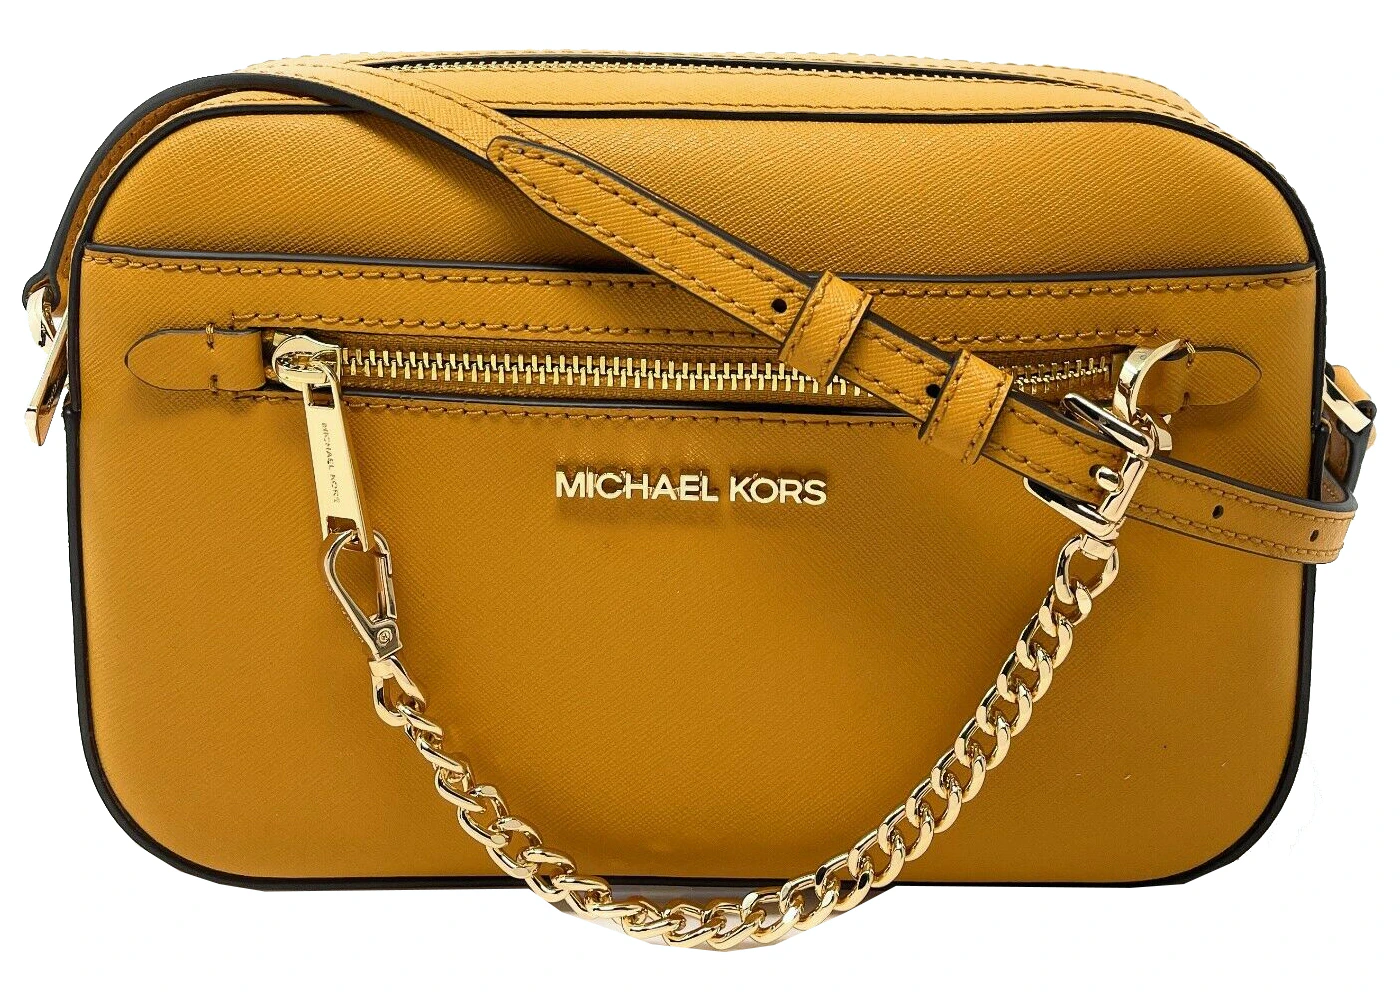 Michael Kors Jet Set Zip Chain Crossbody Bag Large Marigold in Saffiano  Leather with Gold-tone - US